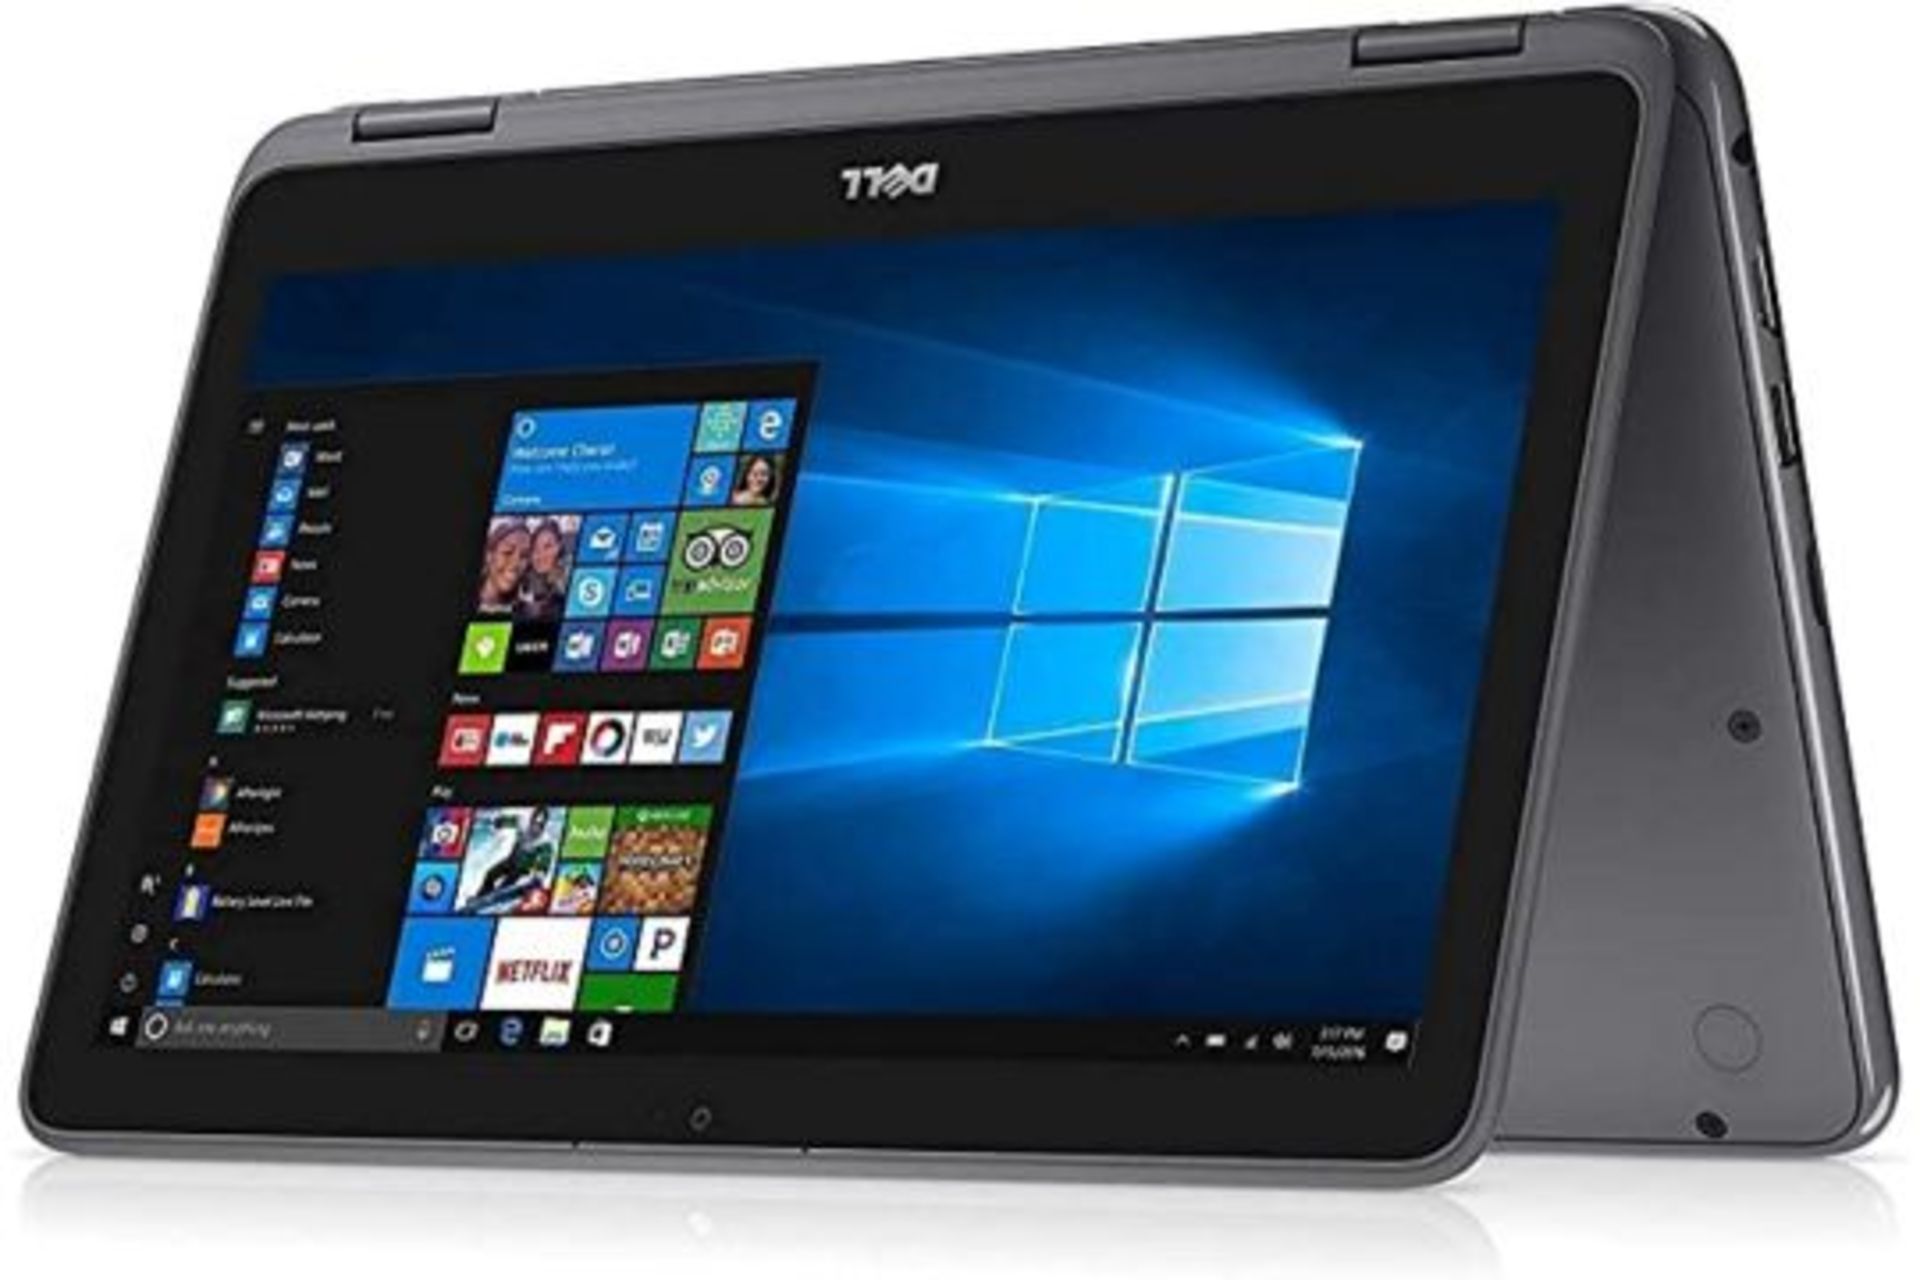 TRADE LOT 10 X NEW DELL LATITUDE 3190 TWO IN ONE LAPTOP TABLET RRP £495 EACH